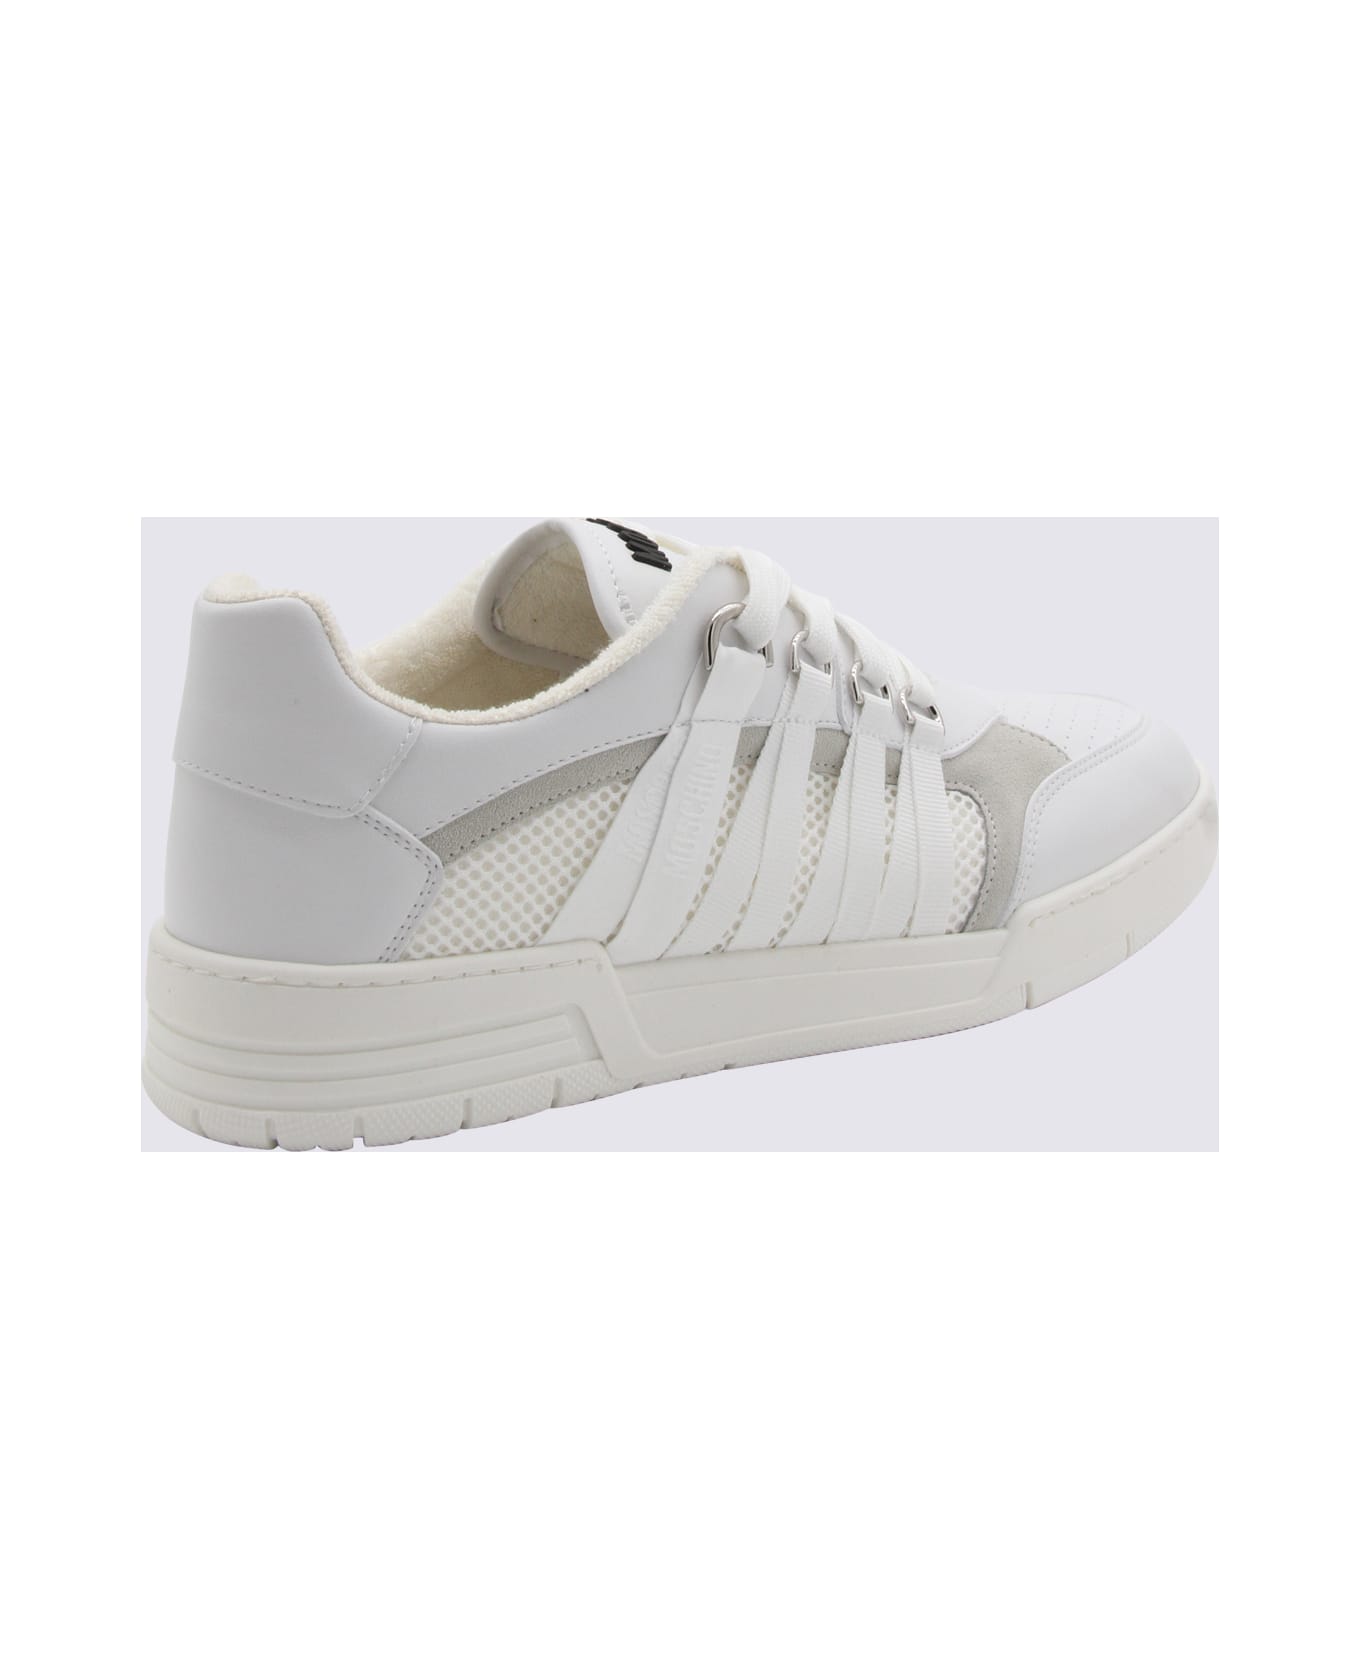 Moschino White Leather Sneakers - White スニーカー